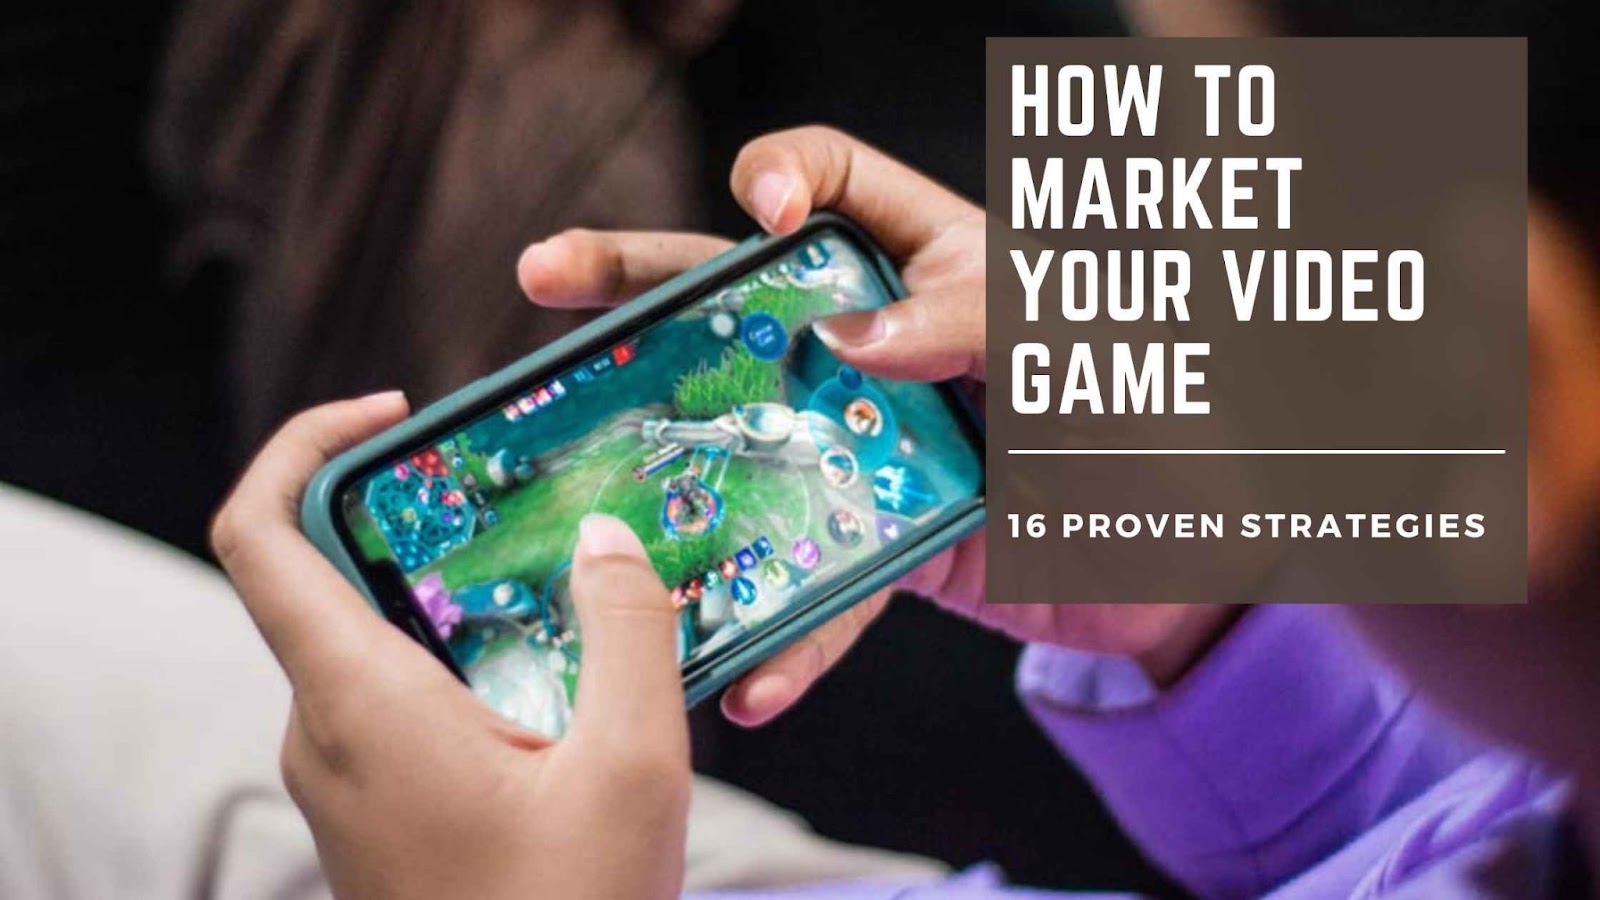 Learn how to market your video game with these 16 affordable marketing strategies. From social media to community engagement, get expert tips for indie developers.